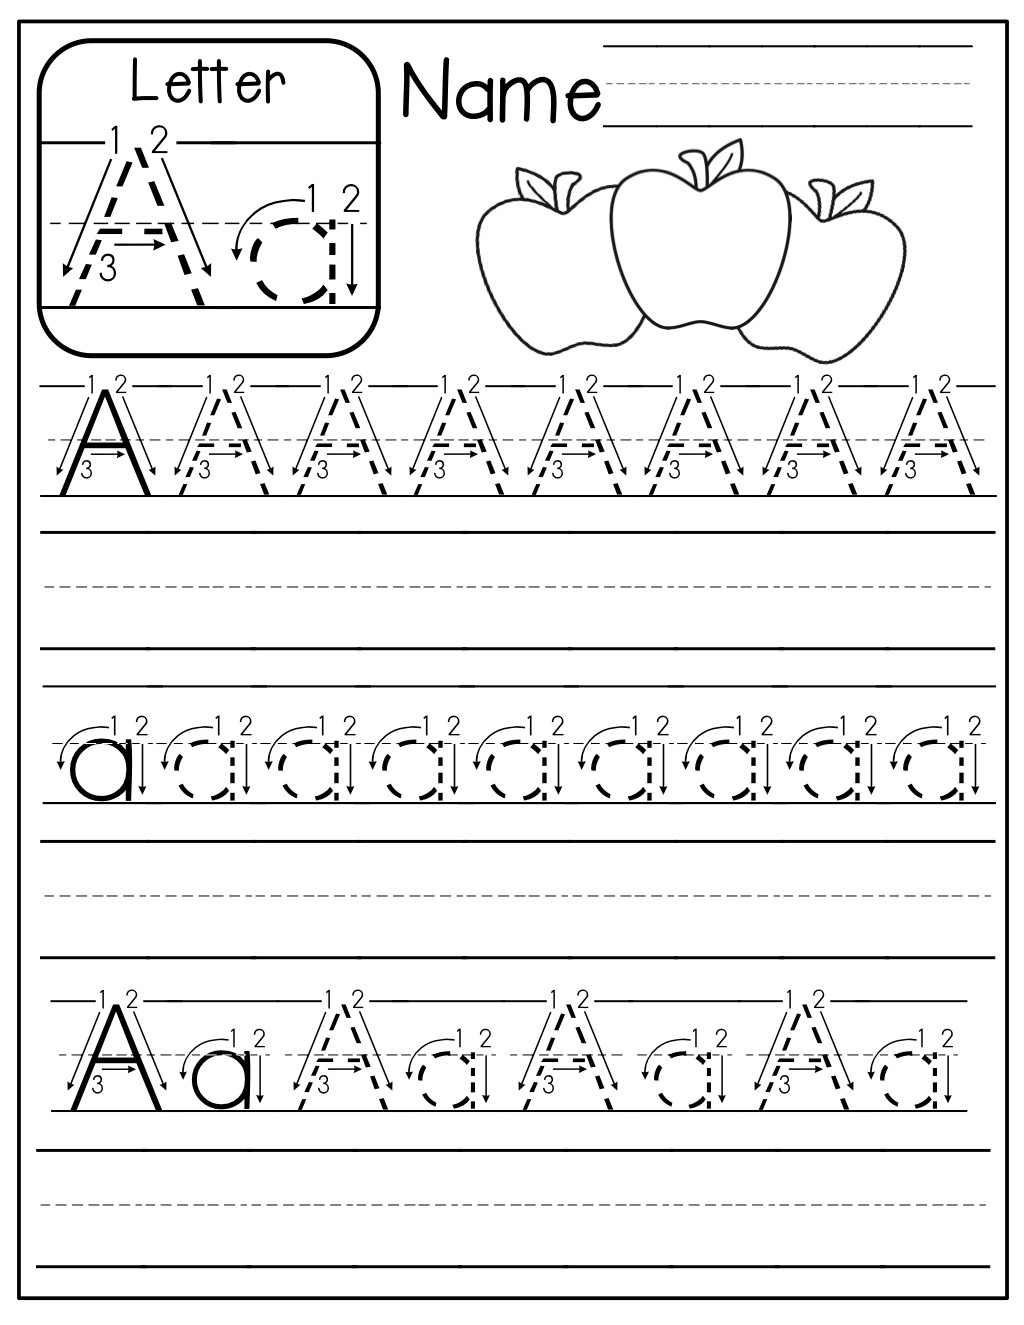 Alphabet Tracing Practice Sheets